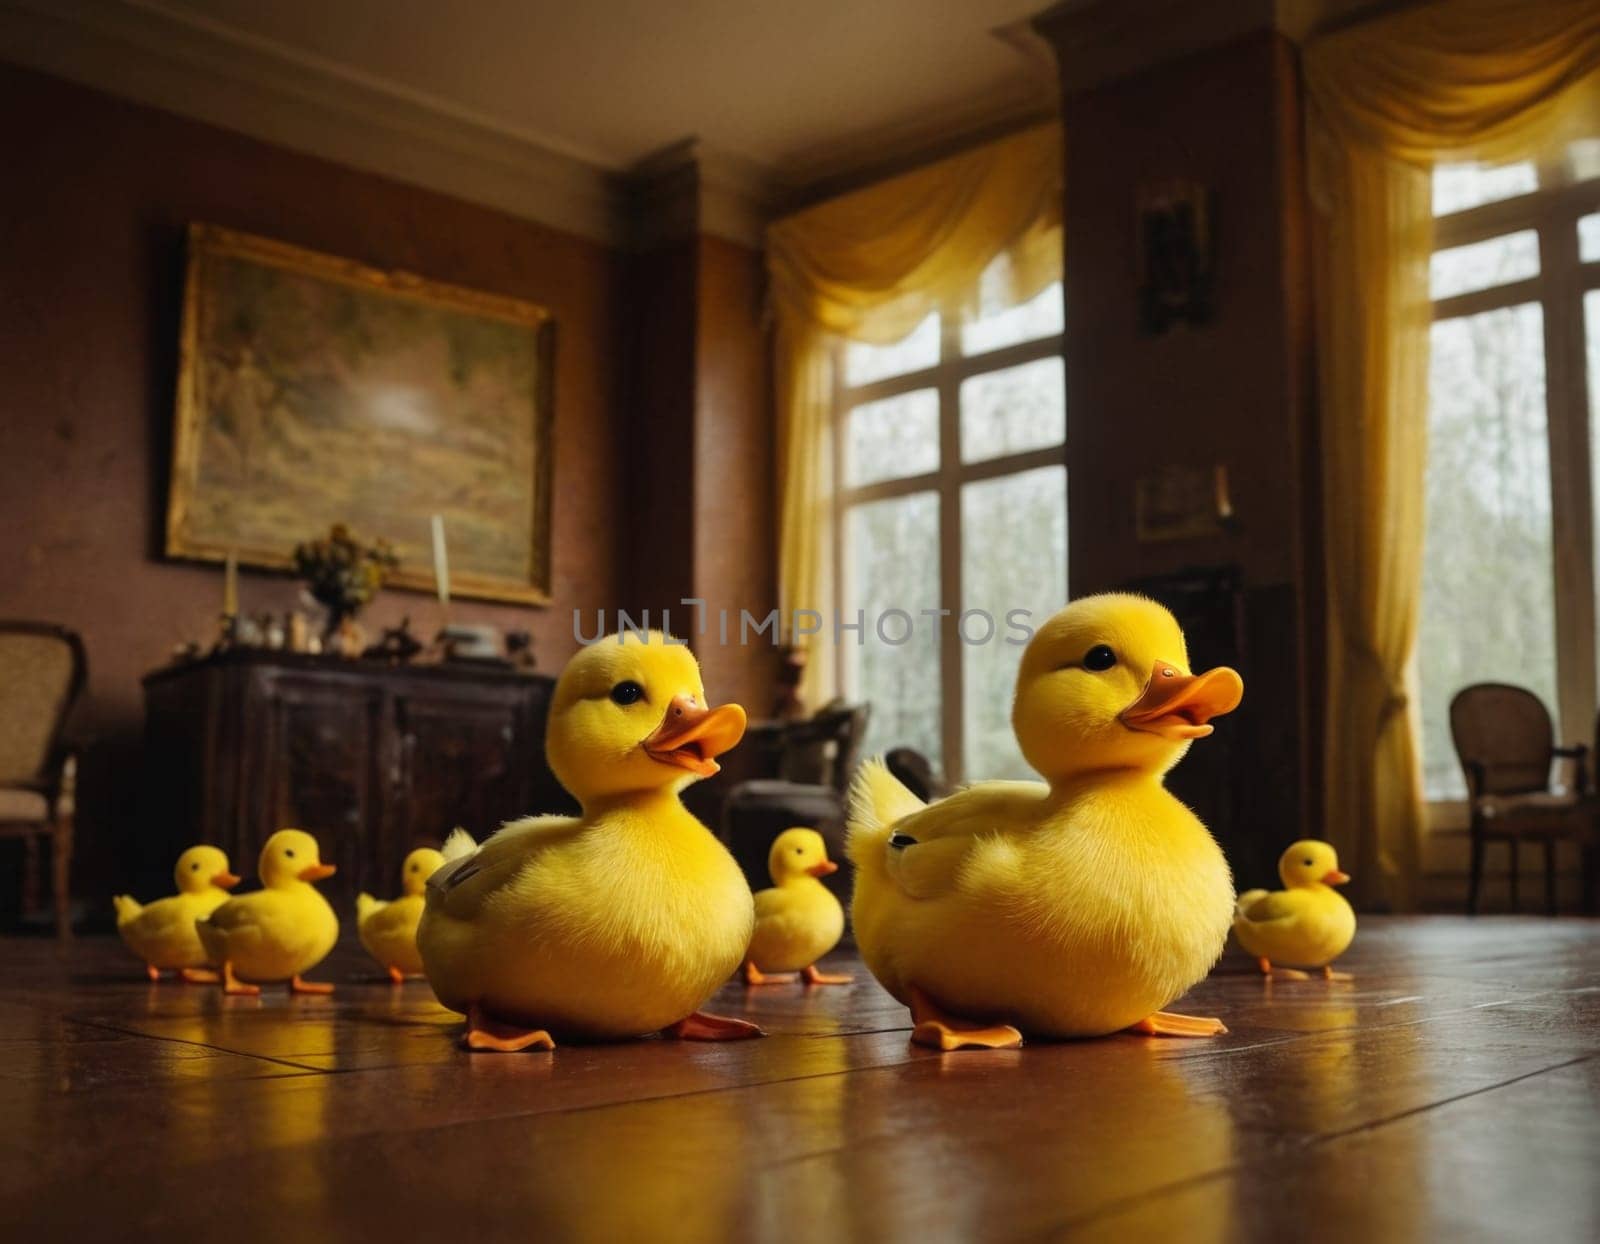 A group of four yellow rubber ducks are sitting in a blue tray. One of the ducks is smaller than the others.AI generation